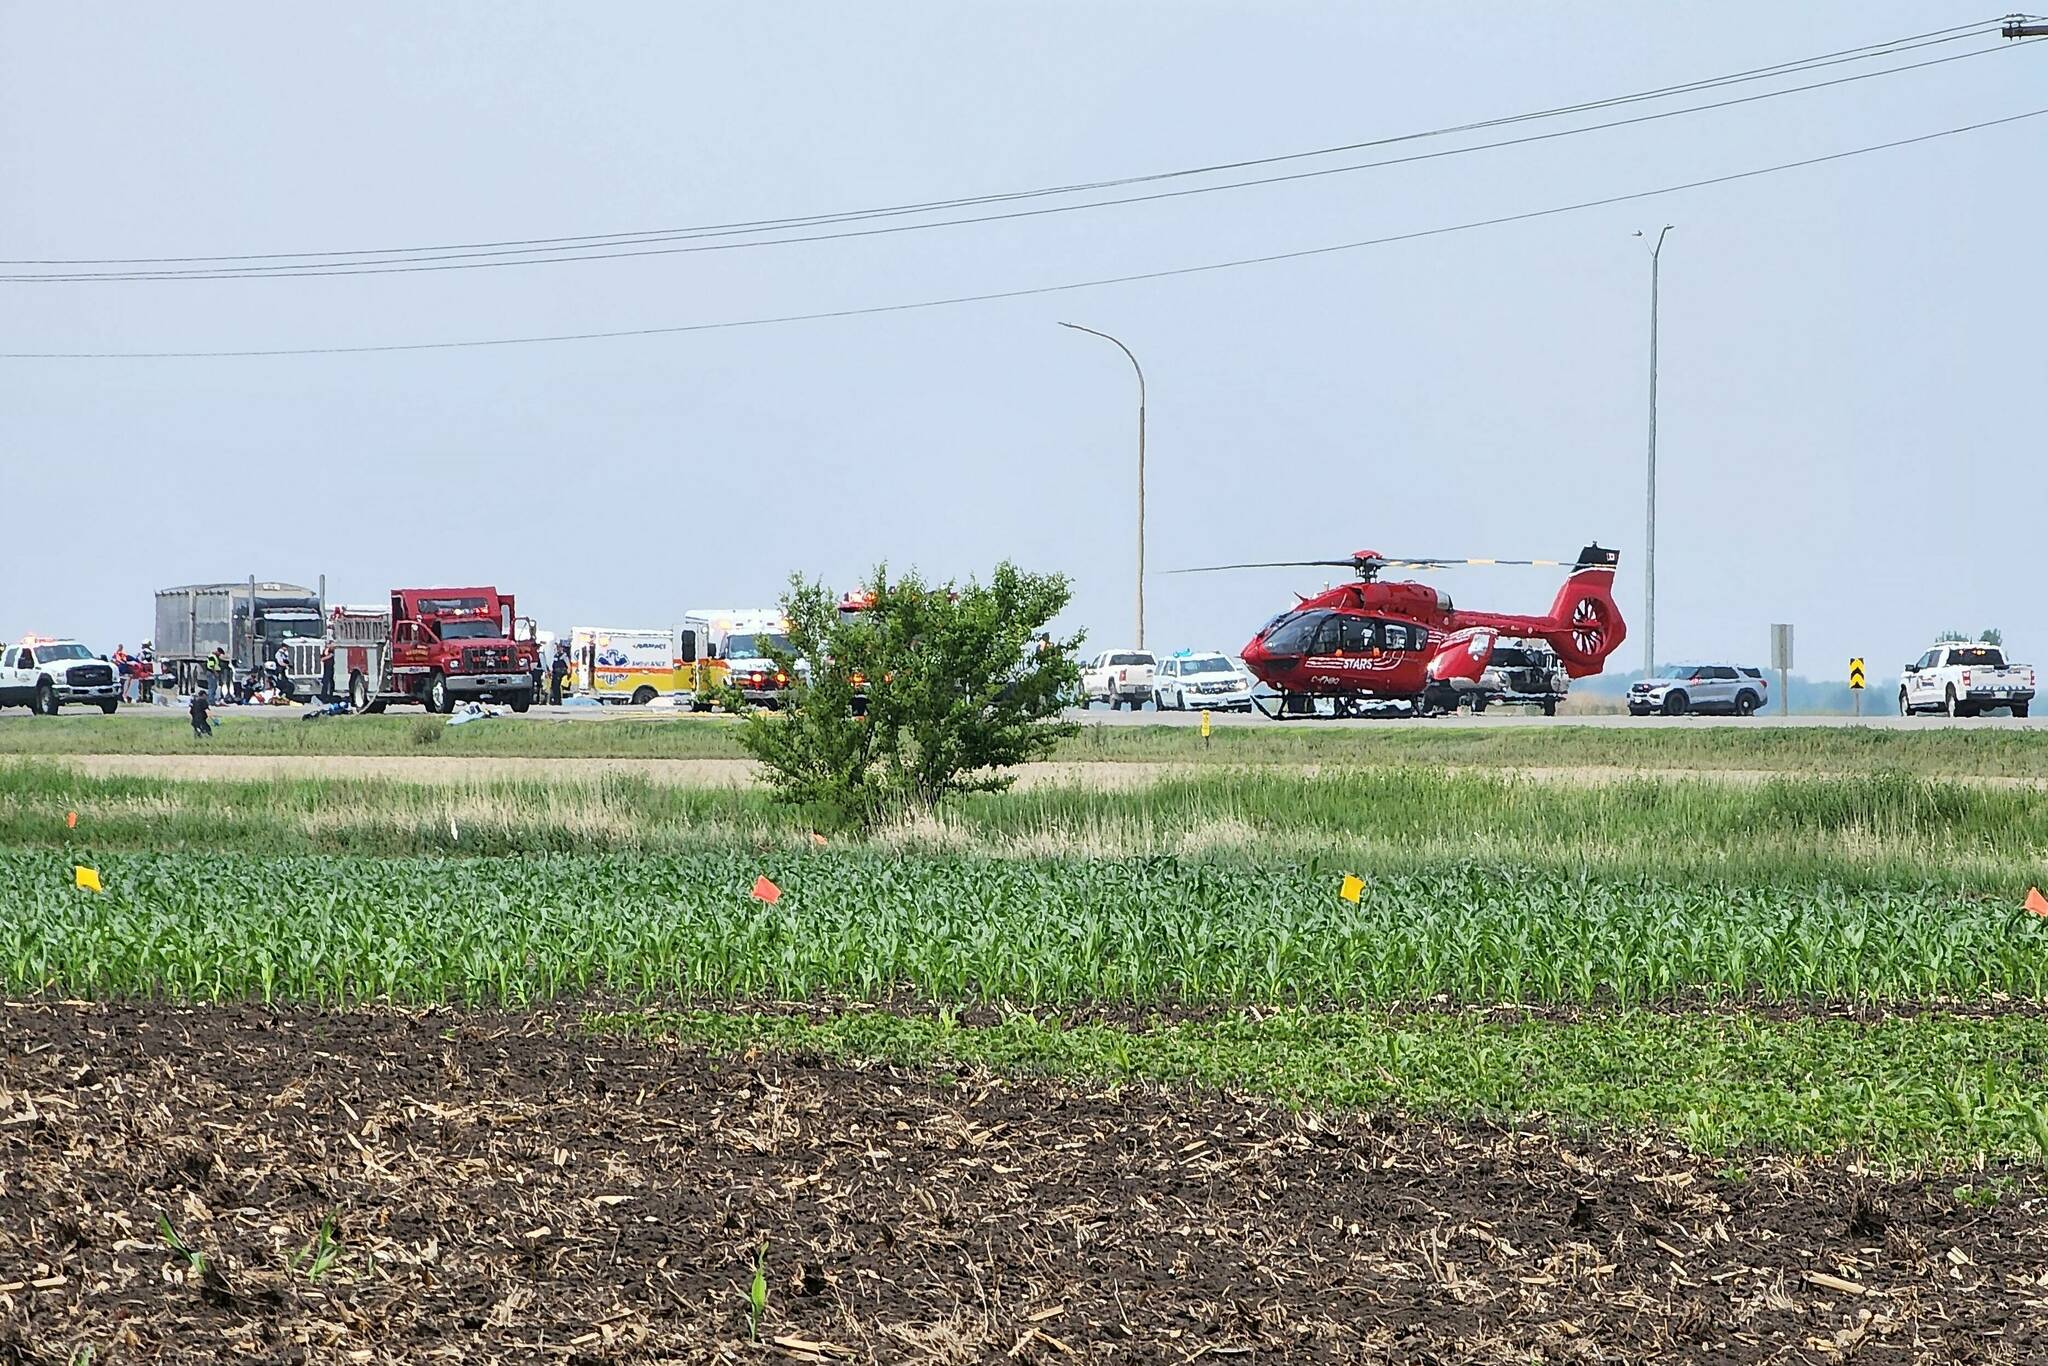 A crash, as shown in this handout image provided by Nirmesh Vadera, has closed a section of the Trans-Canada Highway near Carberry, Manitoba on Thursday June 15, 2023. RCMP have posted on social media that they are on the scene of a very serious collision near the intersection of Highway 1 and Highway 5. THE CANADIAN PRESS/HO-Nirmesh Vadera